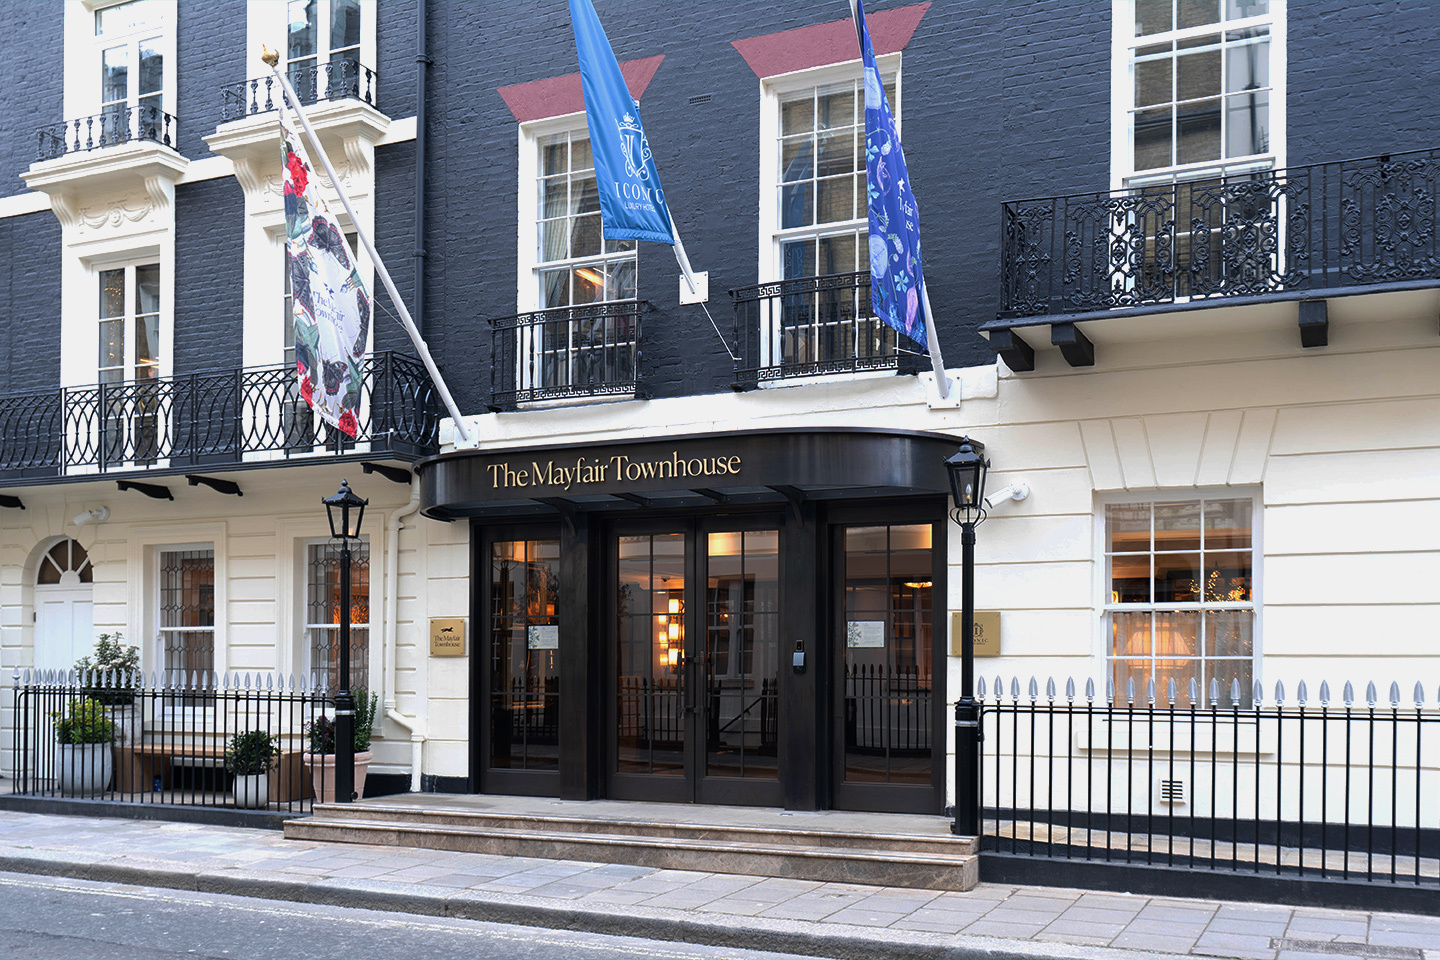 BSBG completes The Mayfair Townhouse handover | Brewer Smith Brewer Group